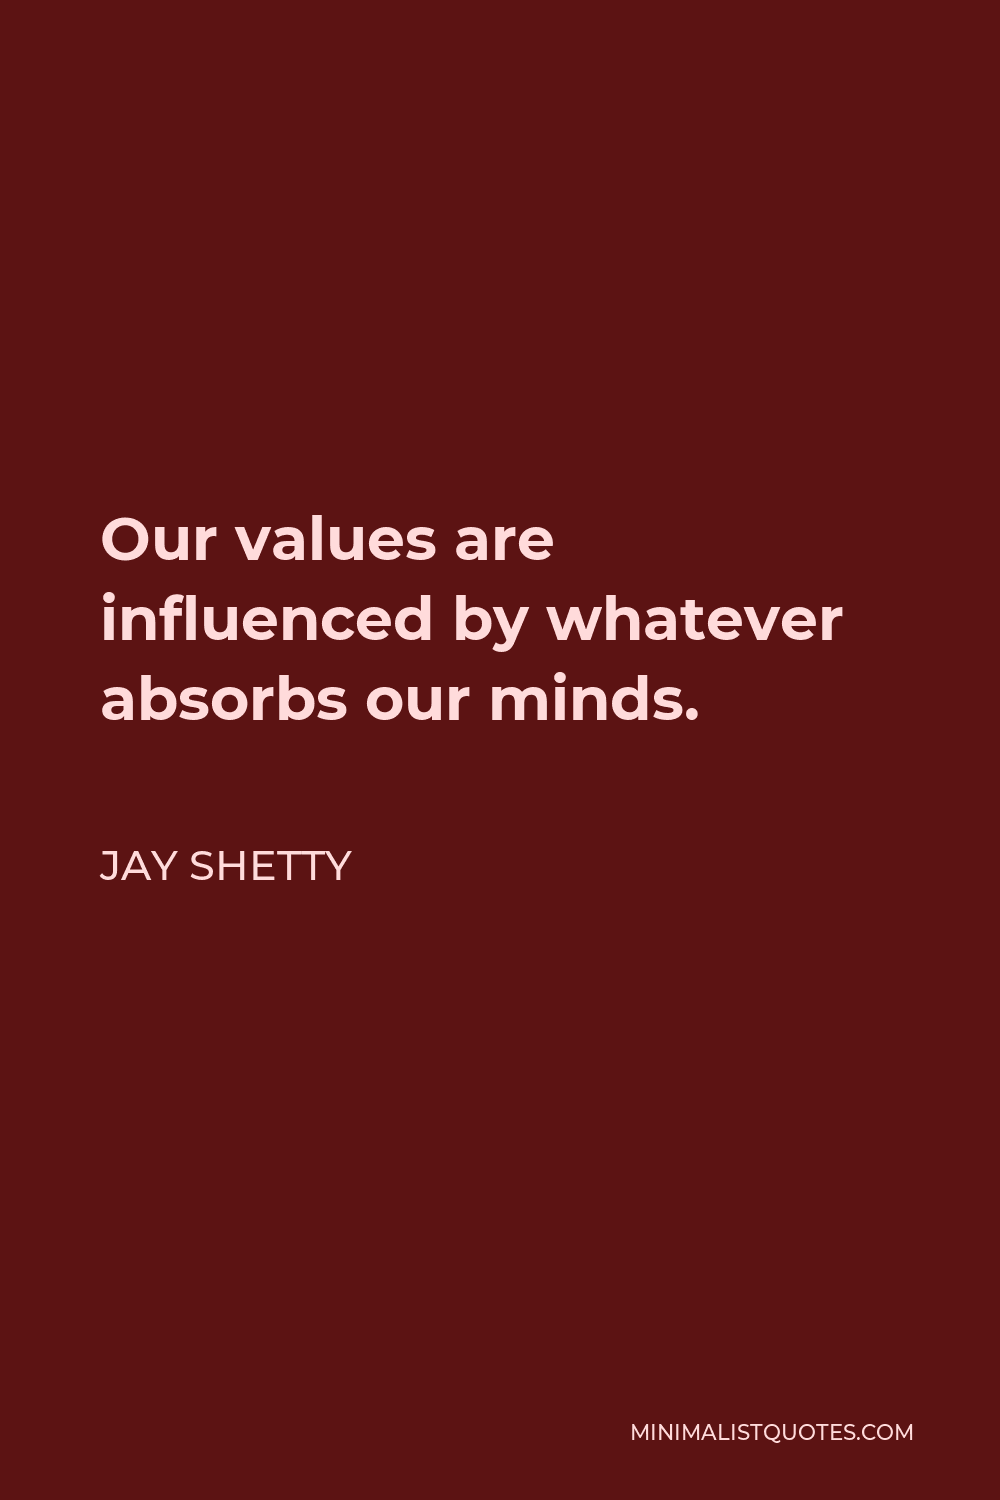 Jay Shetty Quote - Our values are influenced by whatever absorbs our minds.